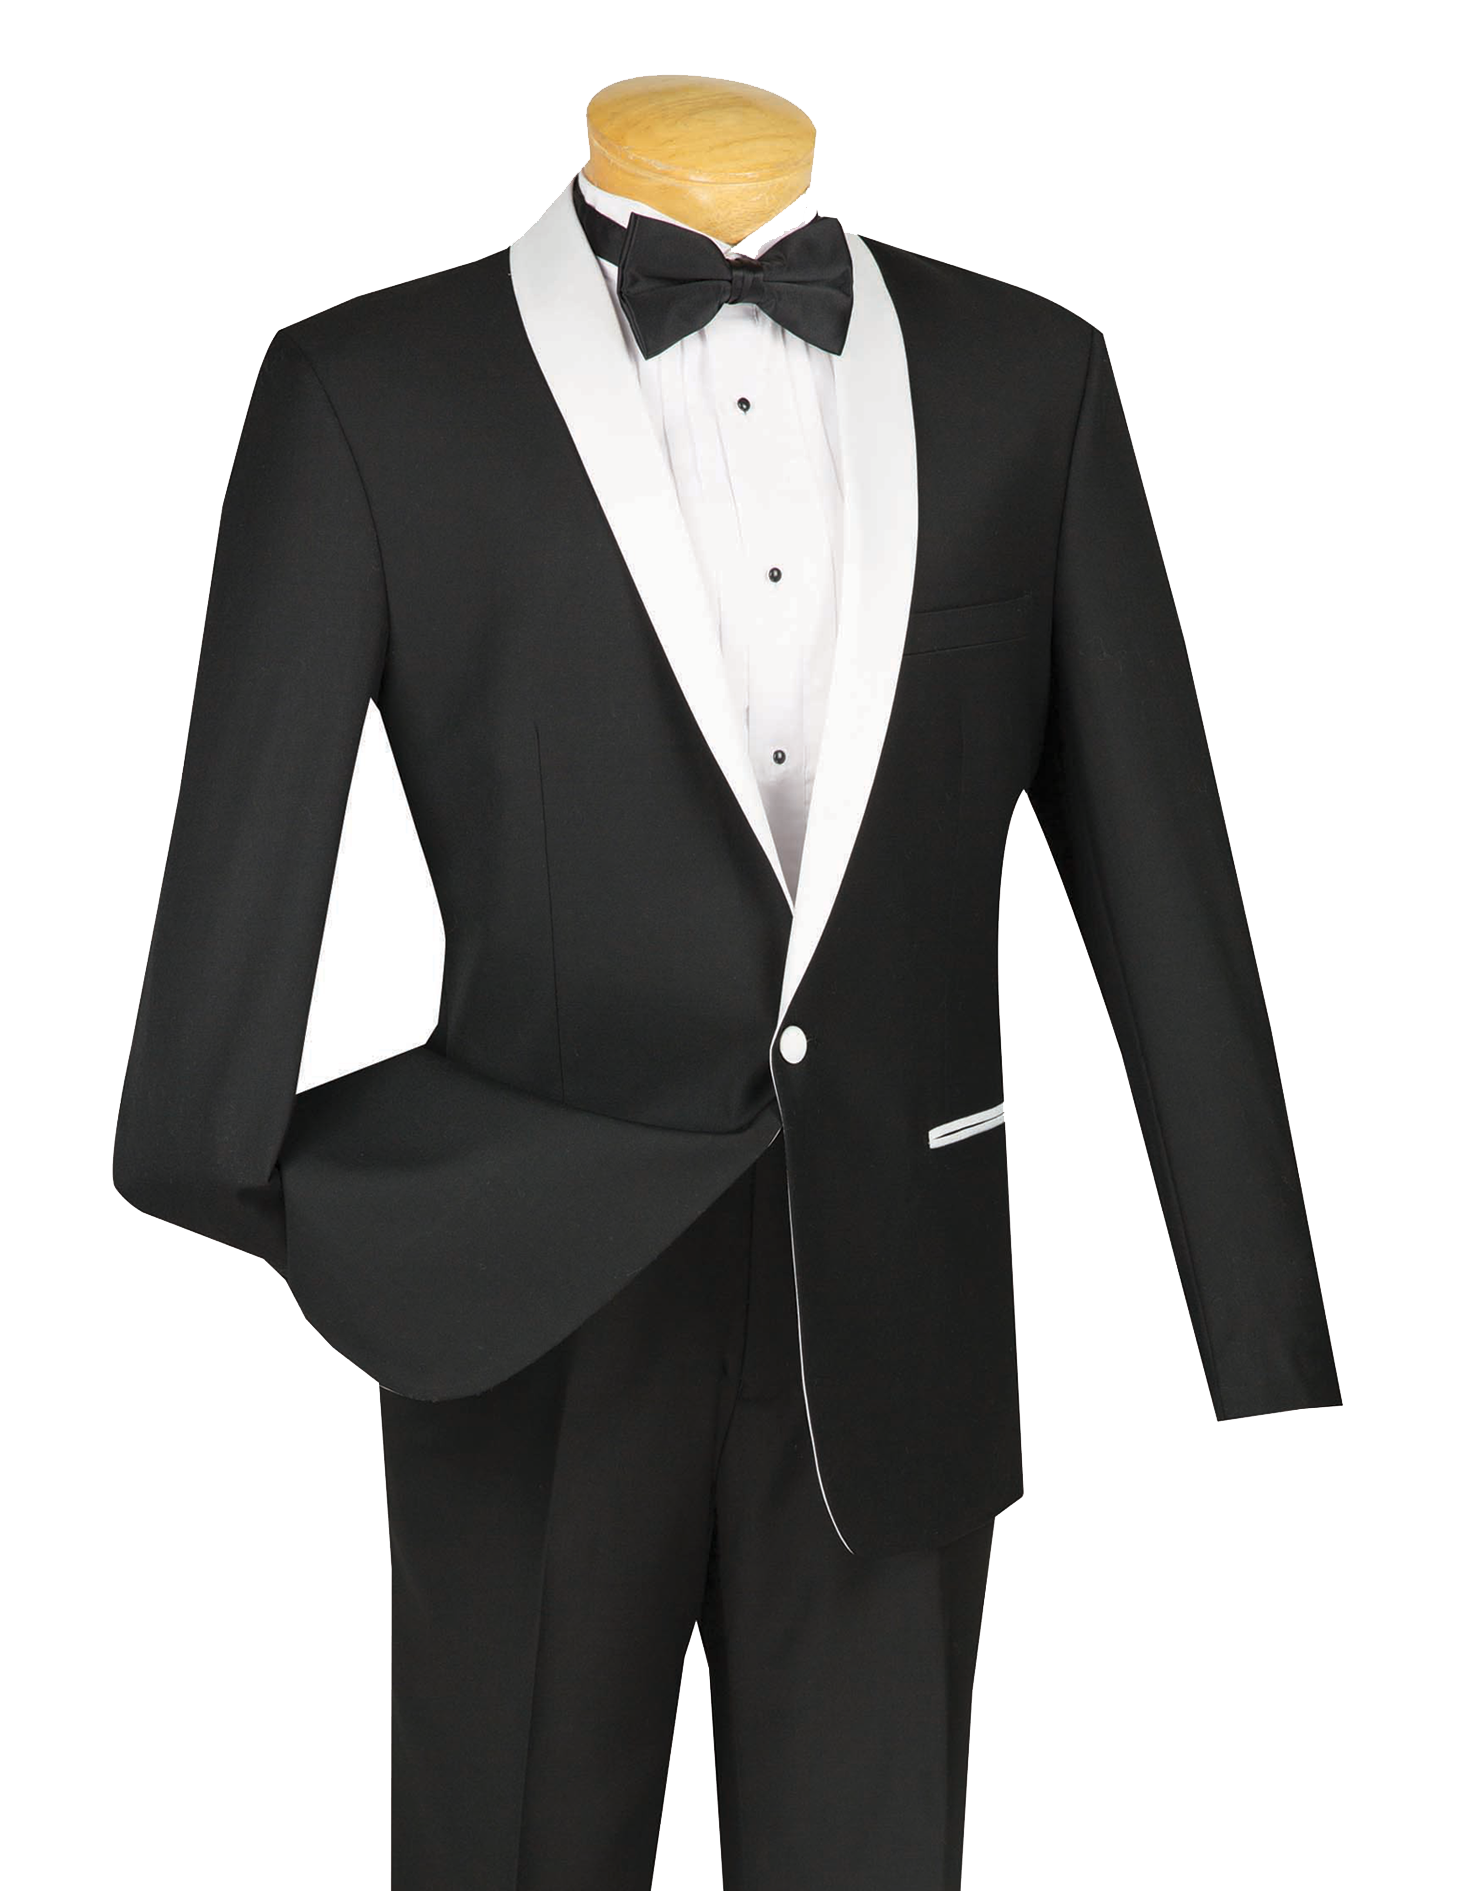 Sierra Collection - 1 Button Slim Fit Tuxedo Black with White Lapel